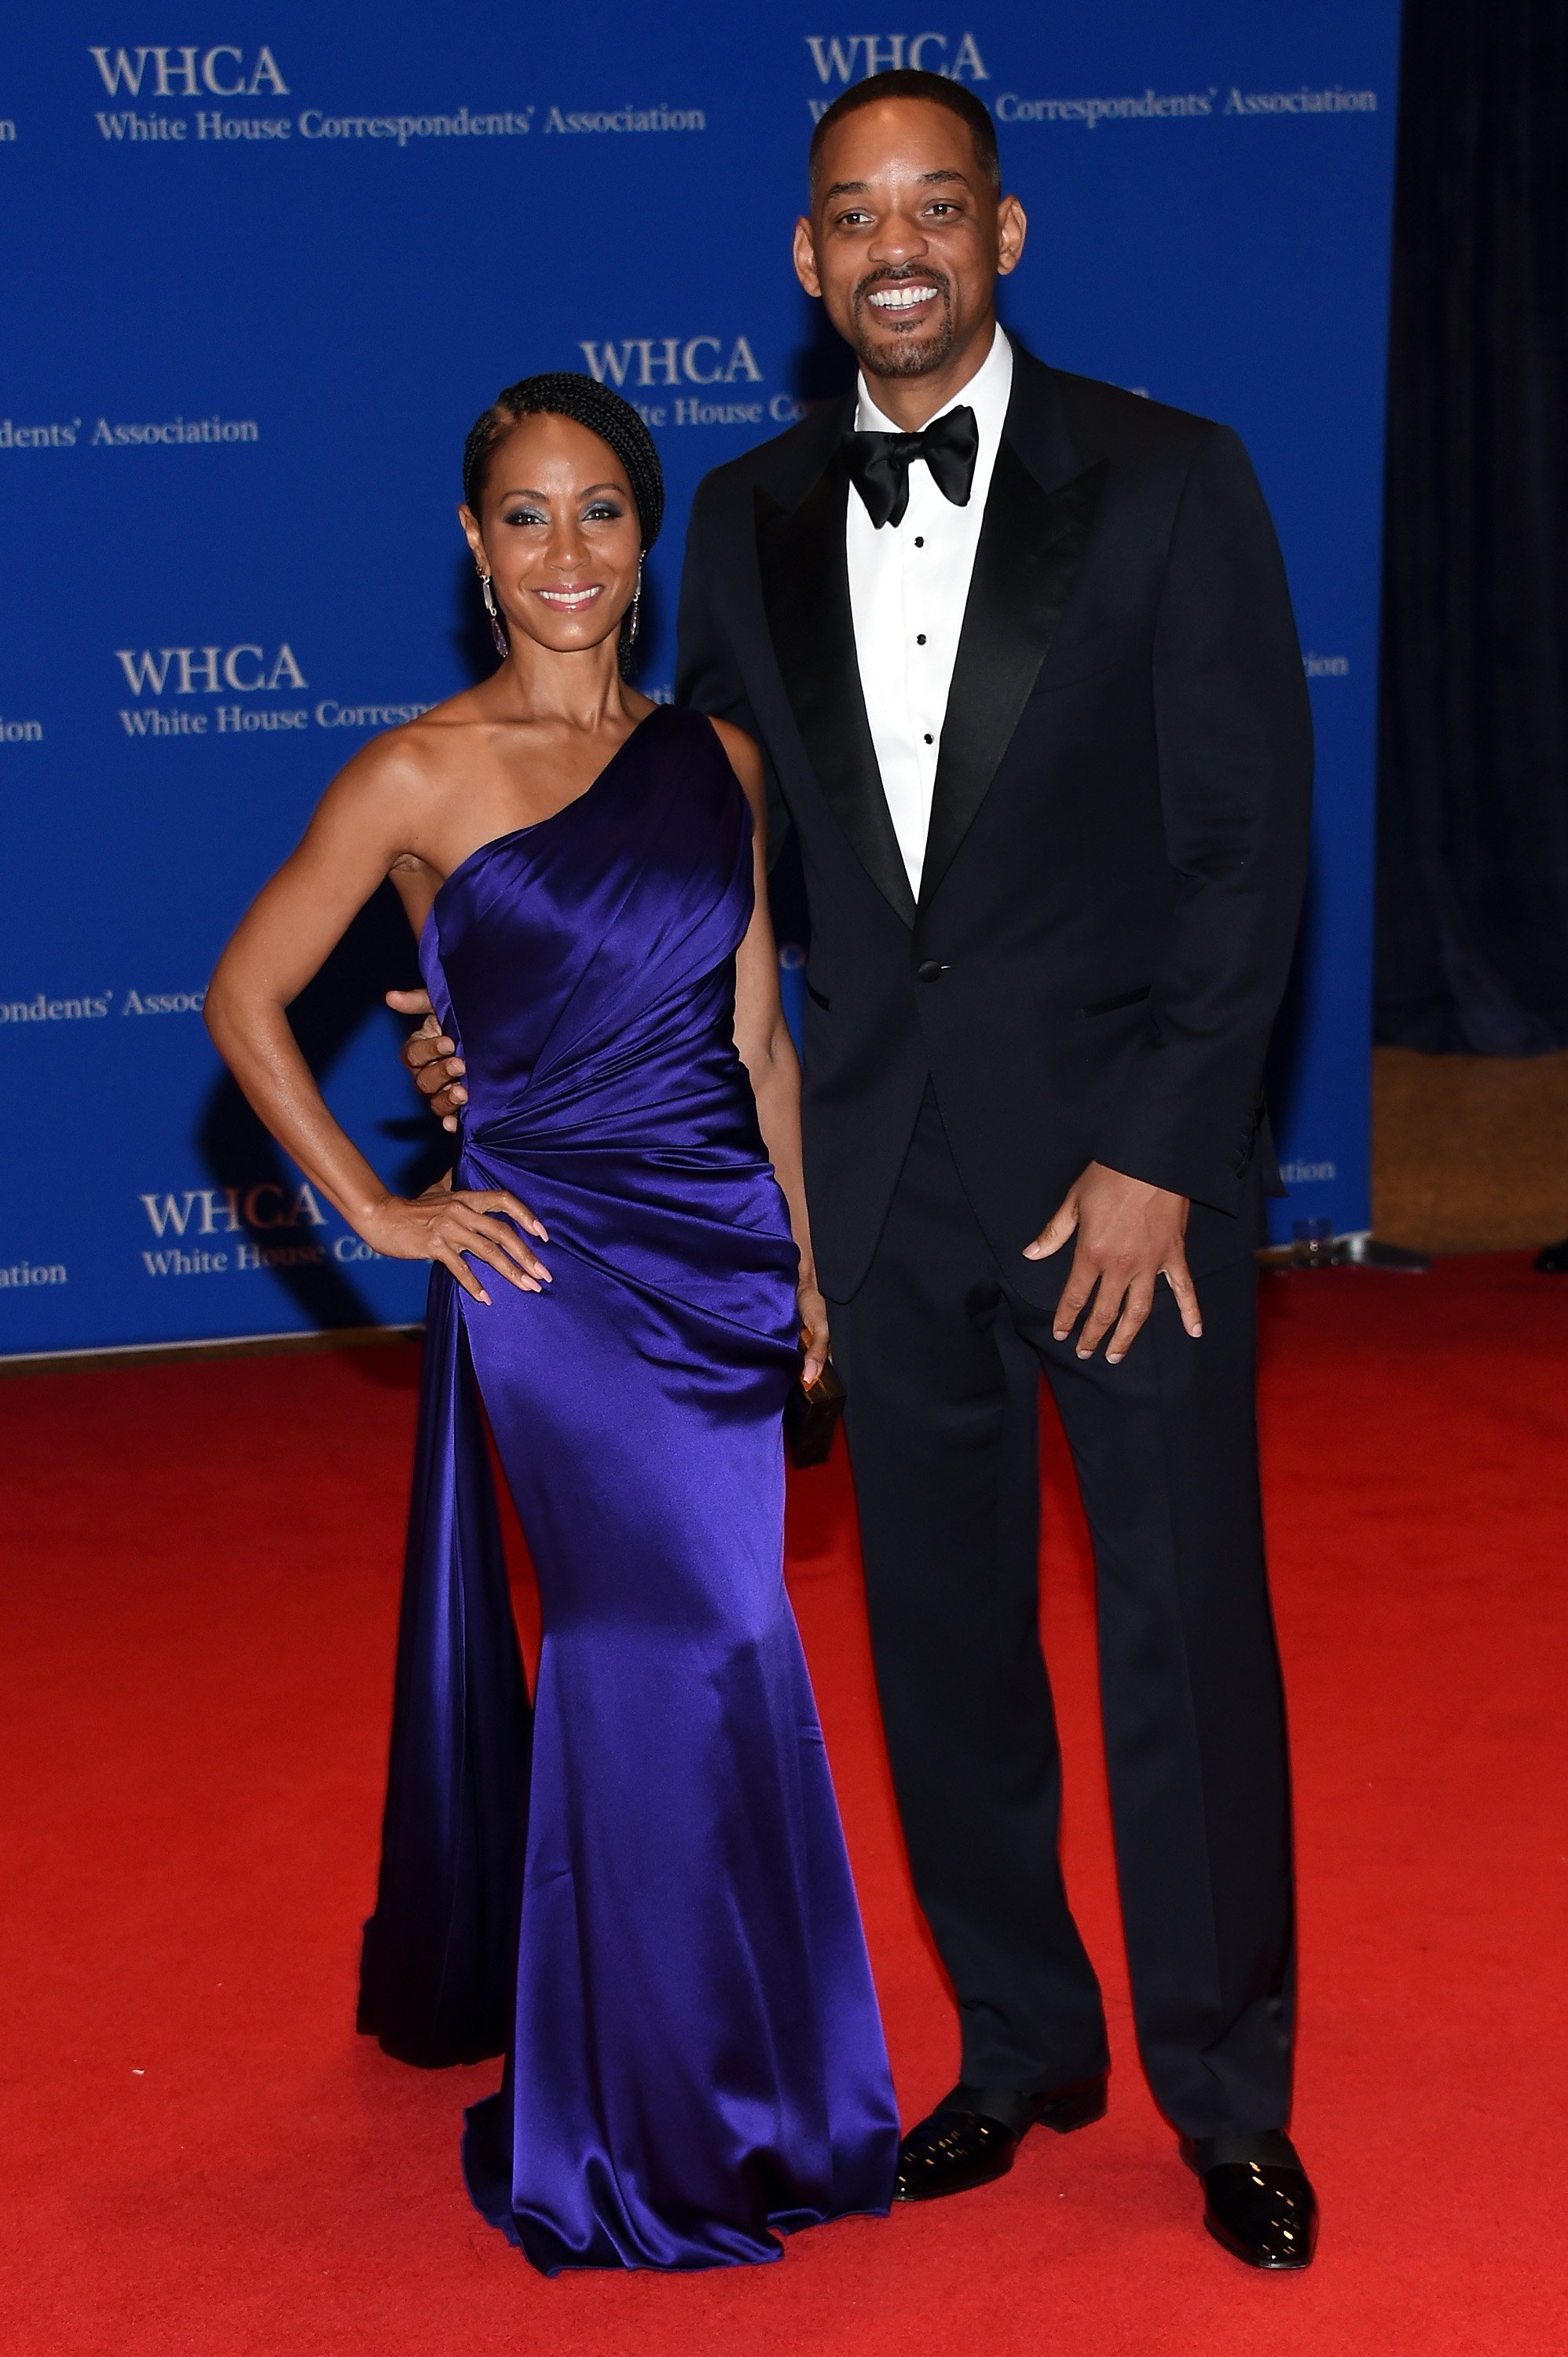 Jada Pinkett Smith & Will Smith at the 102nd White House Correspondents' Association Dinner on April 30, 2016 in Washington, DC. | Photo: Getty Images